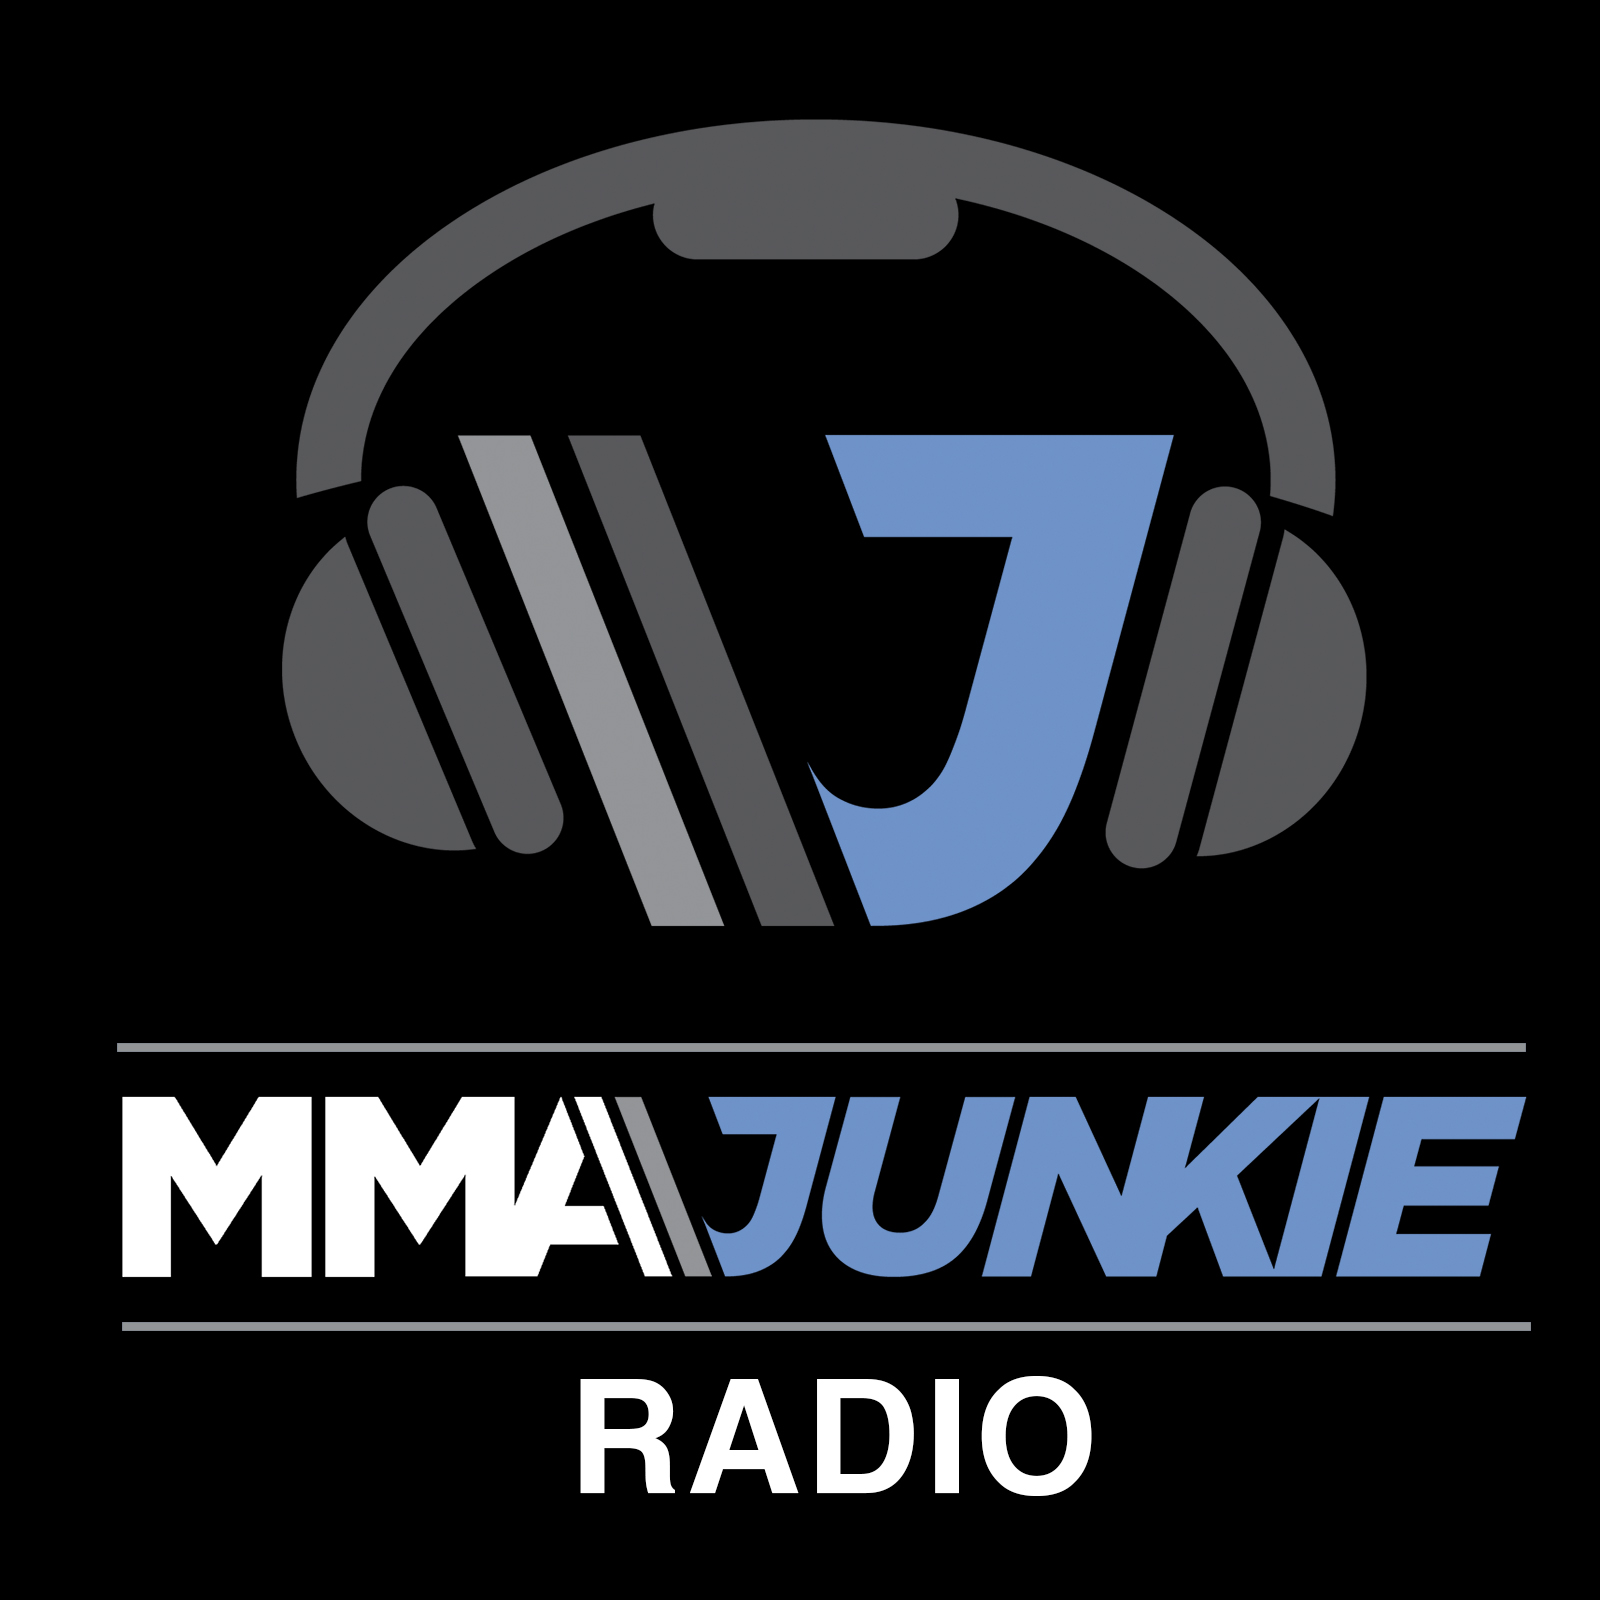 Ep. #3127: Dustin Poirier and how the UFC could make him happy, thoughts on Dan Hooker Vs Tony Ferguson, more